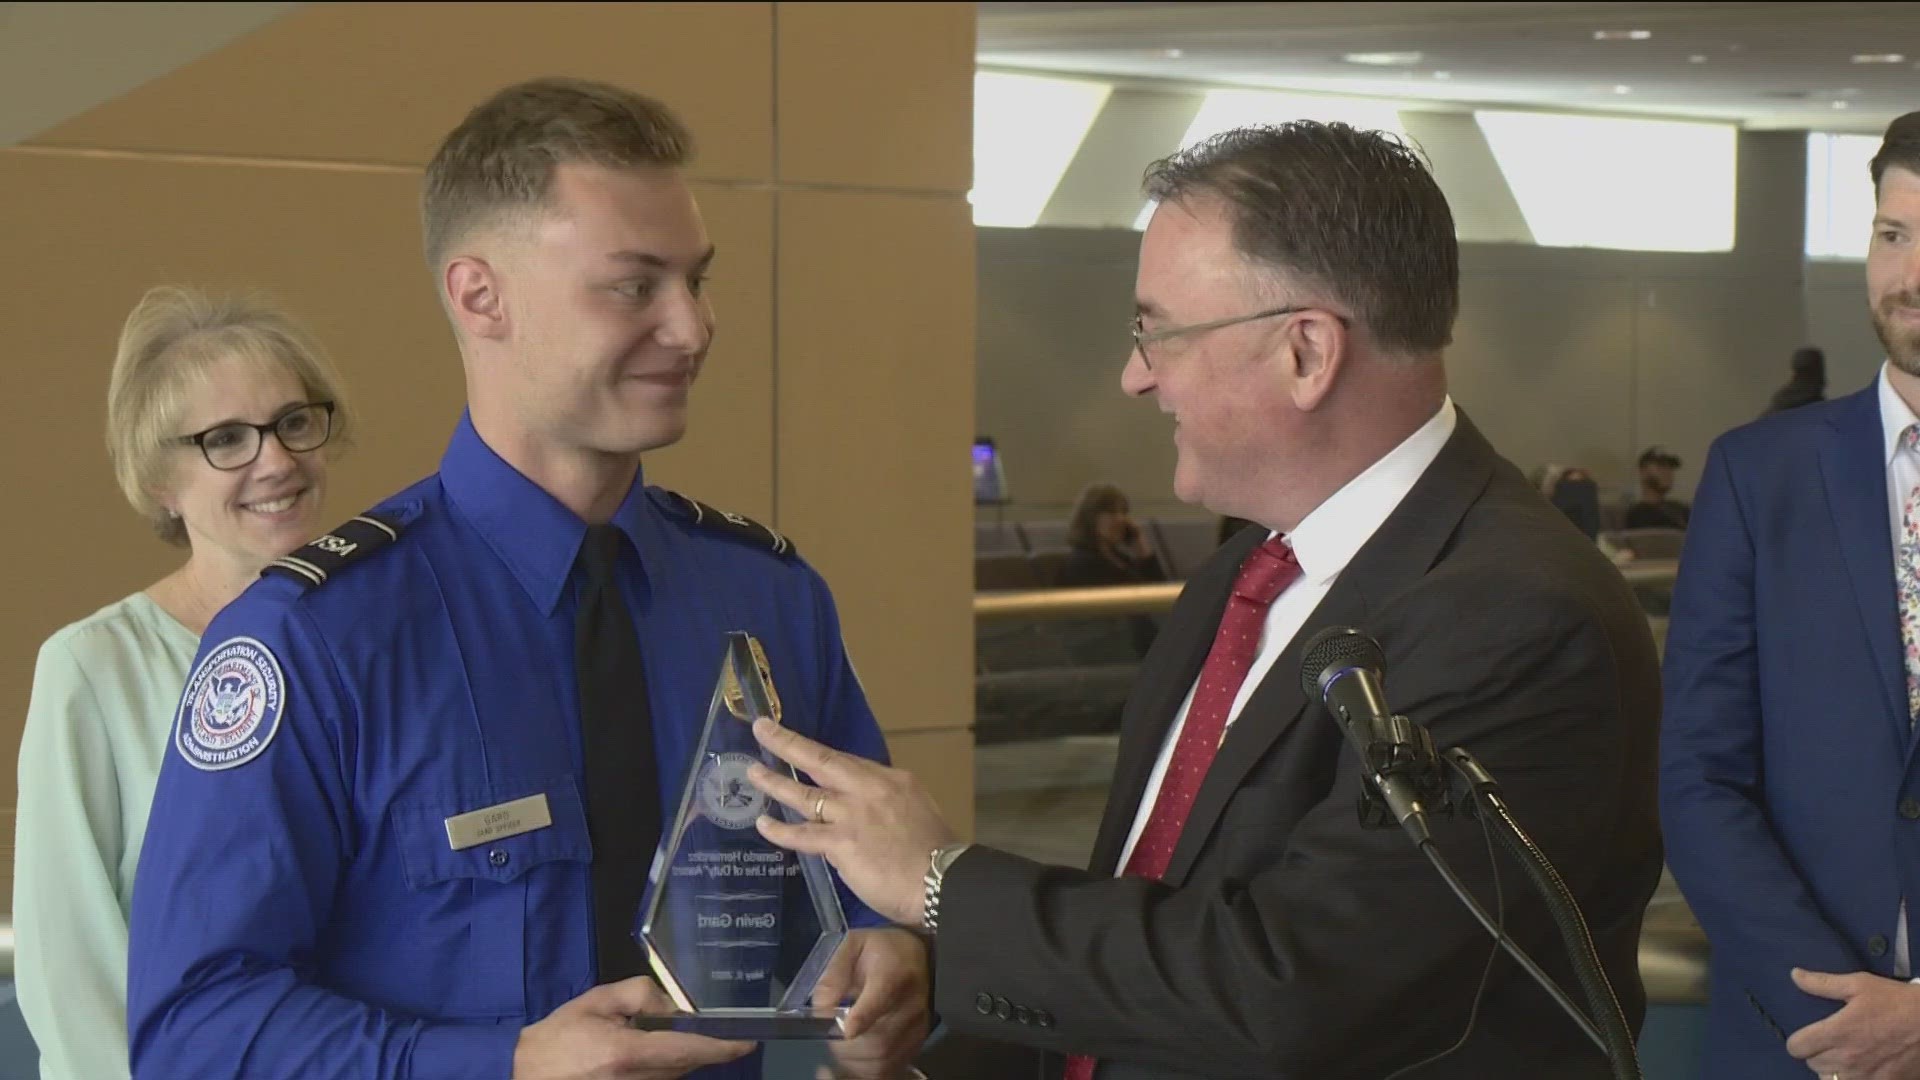 Boise Airport lead TSA officer Gavin Gard received the national 'In the Line of Duty' award for rescuing three people in distress while floating the Boise River.